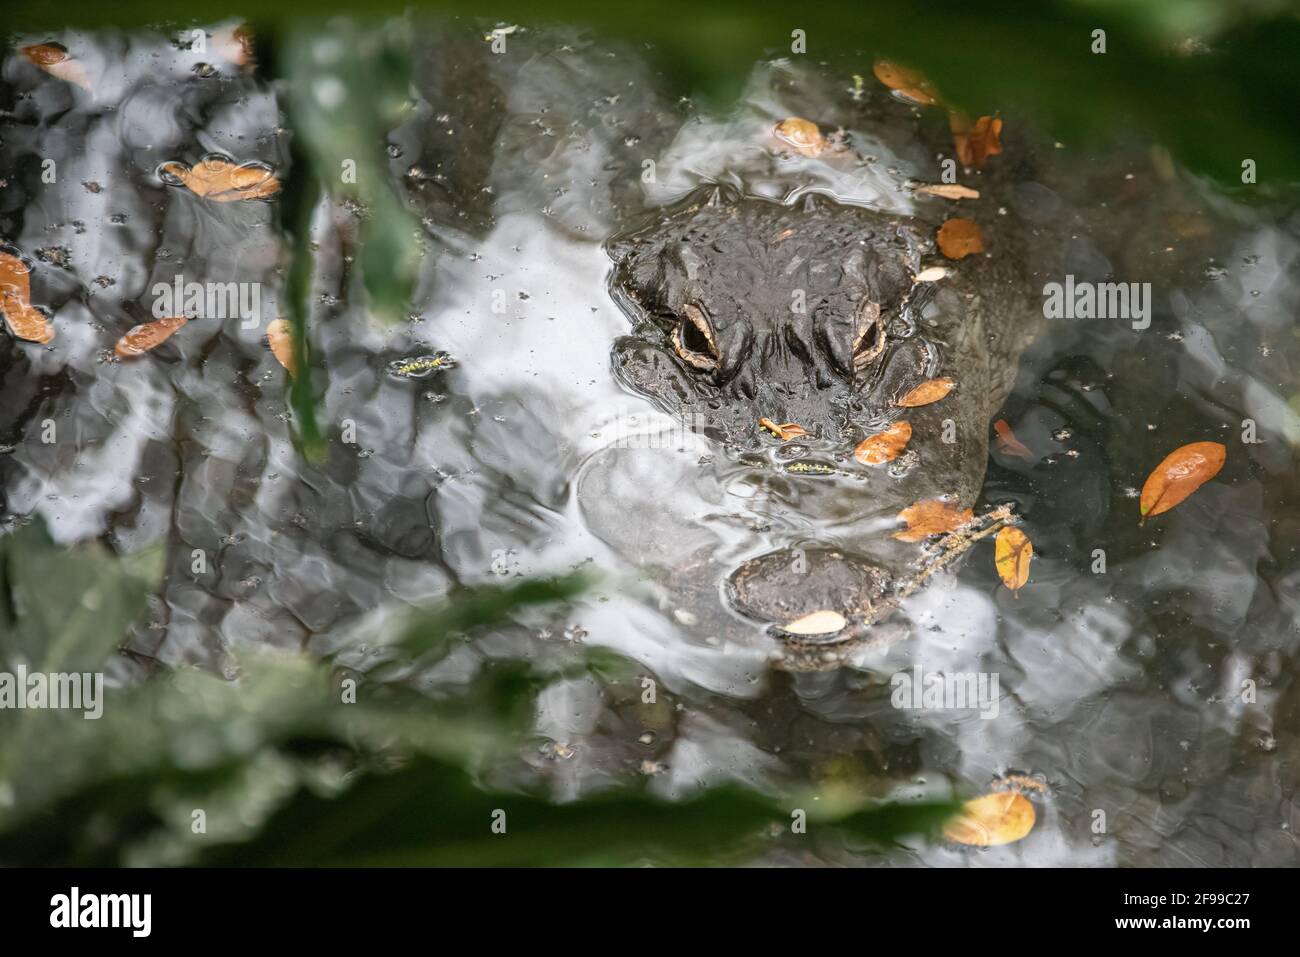 Camouflaged alligator (Alligator mississippiensis) with eyes and tip of snout emerging from the surface of a pond in St. Augustine, Florida. (USA) Stock Photo